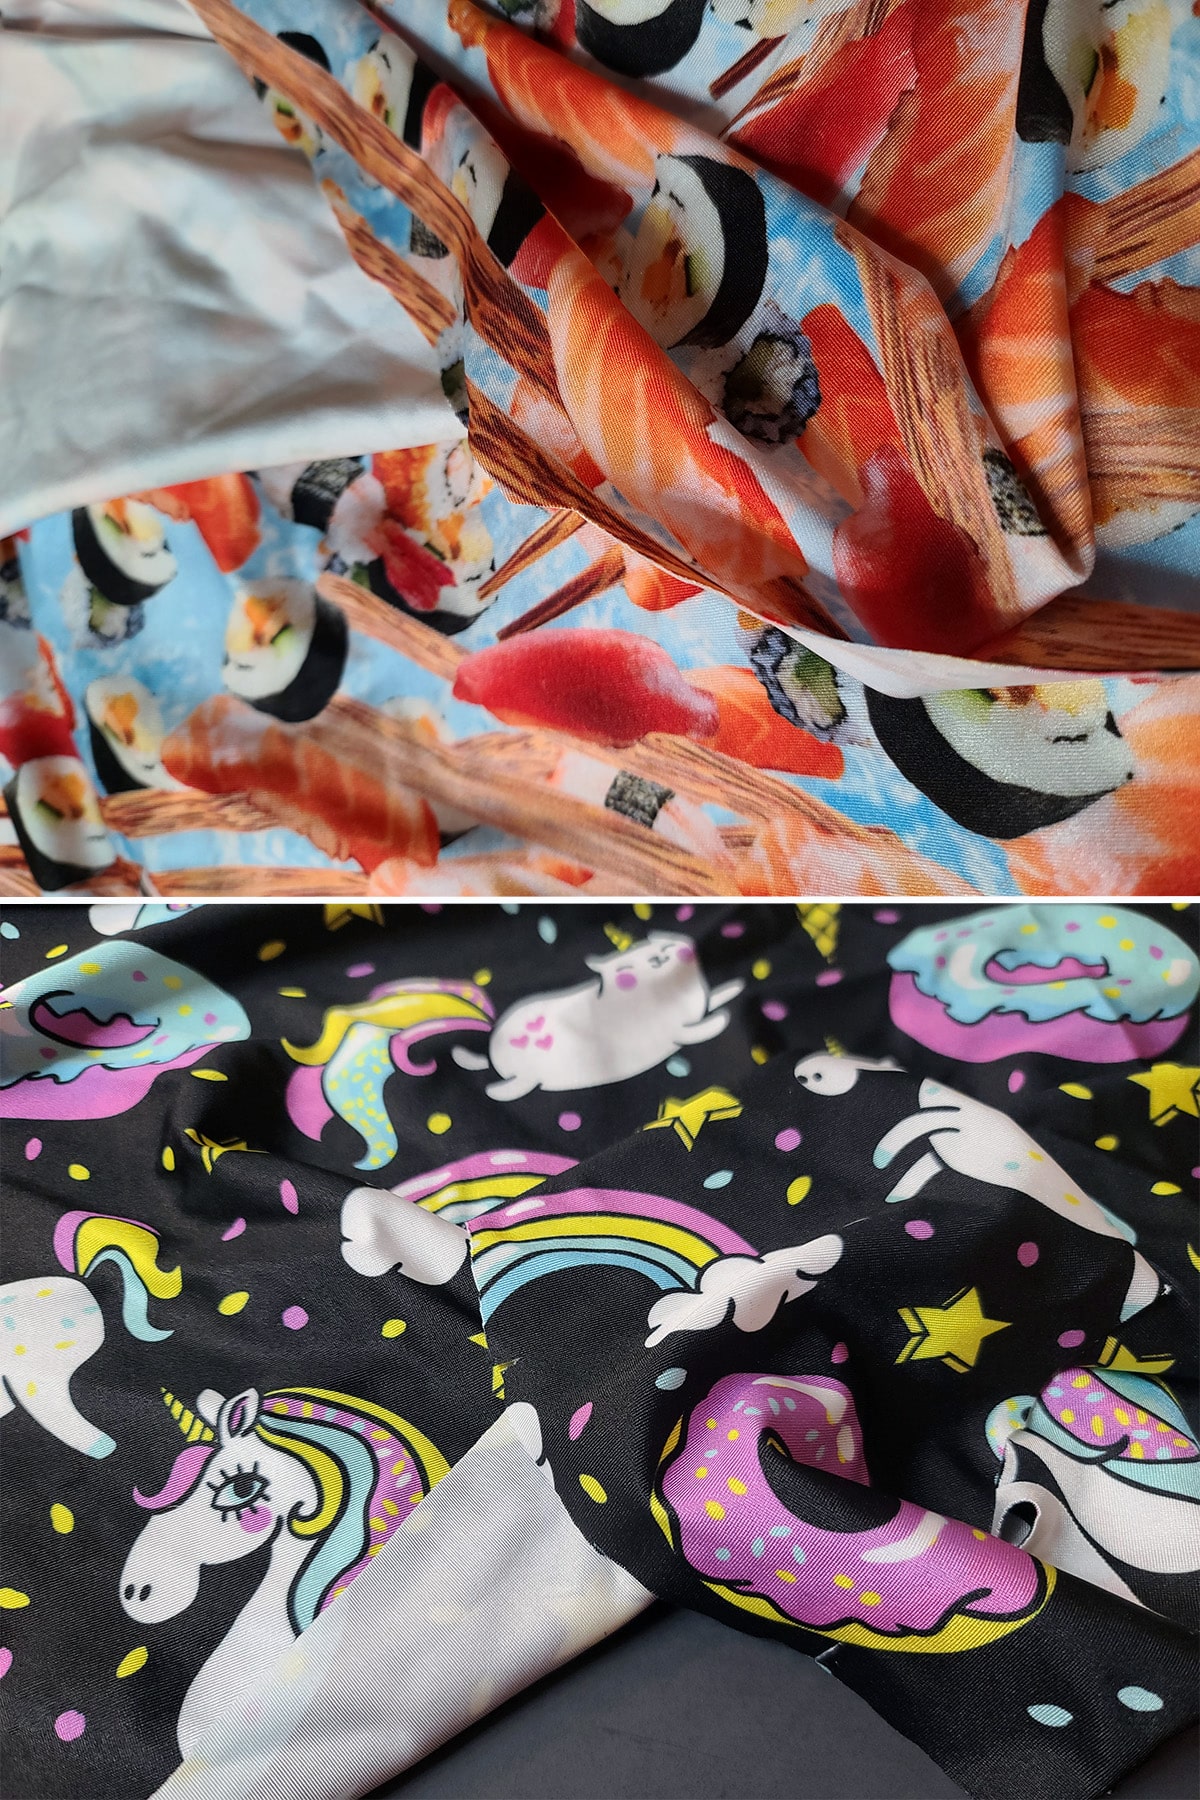 Printed poly spandex in a sushi print, as well as one with a unicorns and rainbows design.